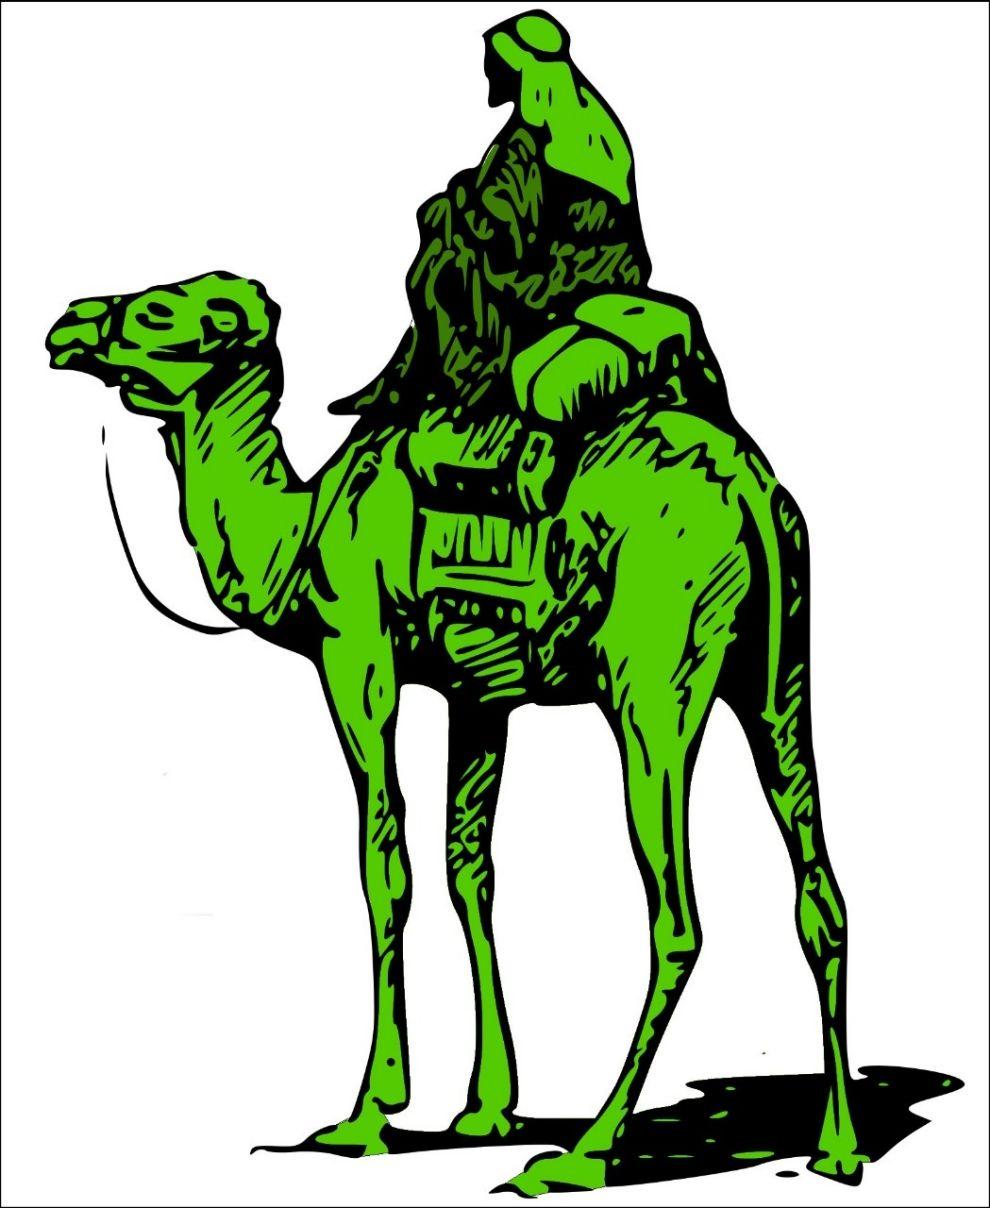 Silkroad Logo - FBI sting and faked death may have played key role in Silk Road